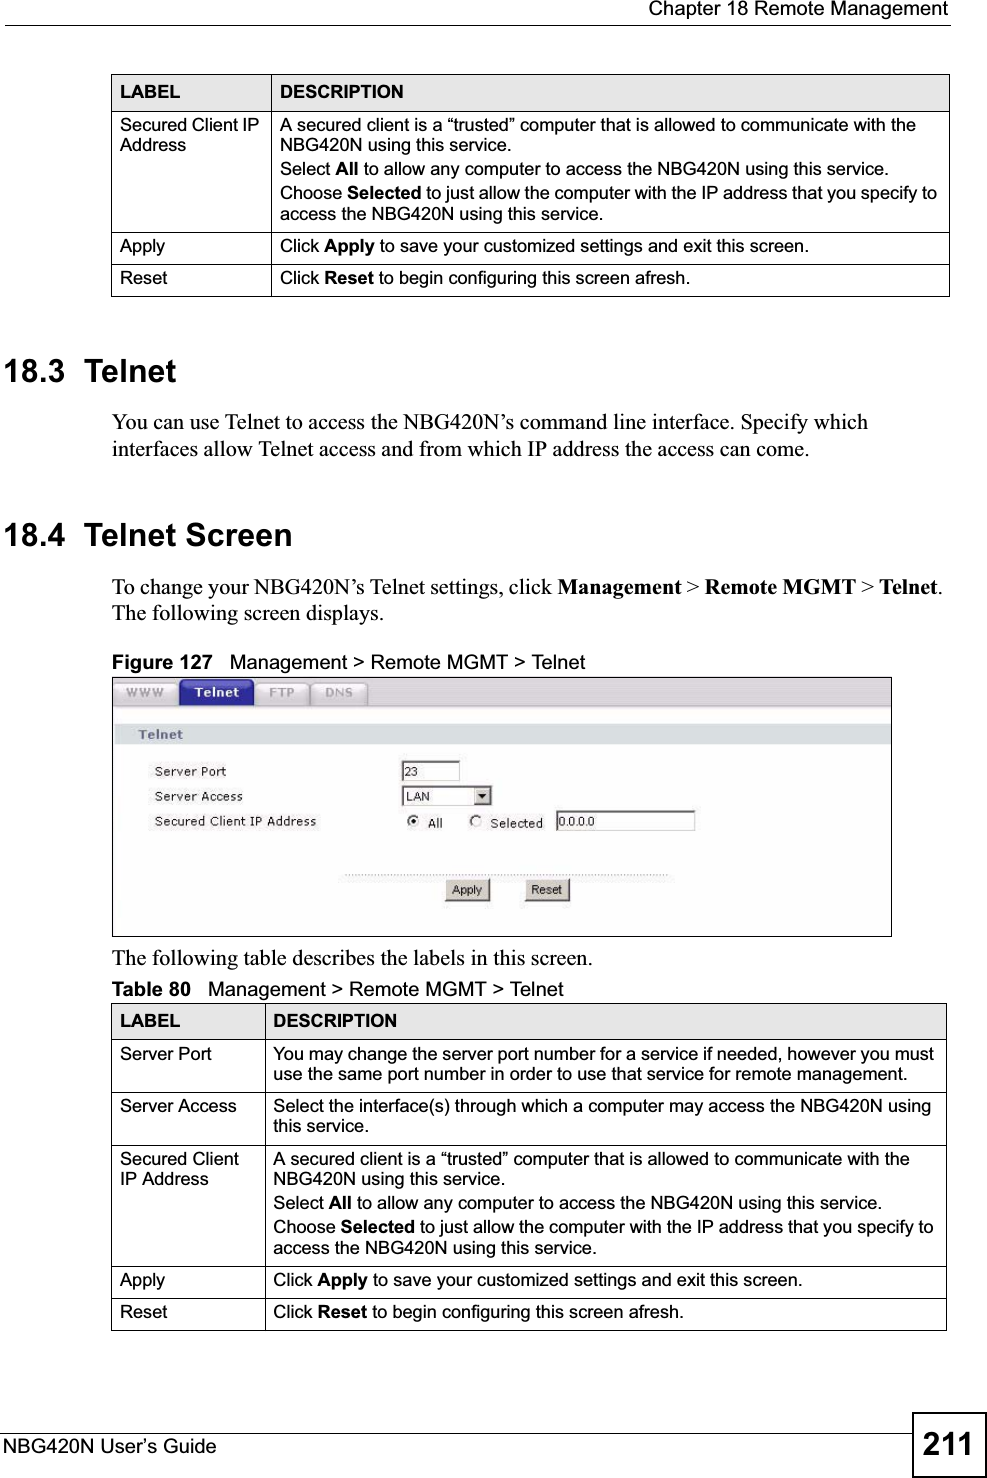  Chapter 18 Remote ManagementNBG420N User’s Guide 21118.3  TelnetYou can use Telnet to access the NBG420N’s command line interface. Specify which interfaces allow Telnet access and from which IP address the access can come.18.4  Telnet ScreenTo change your NBG420N’s Telnet settings, click Management &gt; Remote MGMT &gt; Telnet.The following screen displays. Figure 127   Management &gt; Remote MGMT &gt; Telnet The following table describes the labels in this screen.Secured Client IP AddressA secured client is a “trusted” computer that is allowed to communicate with the NBG420N using this service. Select All to allow any computer to access the NBG420N using this service.Choose Selected to just allow the computer with the IP address that you specify to access the NBG420N using this service.Apply Click Apply to save your customized settings and exit this screen. Reset Click Reset to begin configuring this screen afresh.LABEL DESCRIPTIONTable 80   Management &gt; Remote MGMT &gt; TelnetLABEL DESCRIPTIONServer Port You may change the server port number for a service if needed, however you must use the same port number in order to use that service for remote management.Server Access Select the interface(s) through which a computer may access the NBG420N using this service.Secured Client IP AddressA secured client is a “trusted” computer that is allowed to communicate with the NBG420N using this service. Select All to allow any computer to access the NBG420N using this service.Choose Selected to just allow the computer with the IP address that you specify to access the NBG420N using this service.Apply Click Apply to save your customized settings and exit this screen. Reset Click Reset to begin configuring this screen afresh.